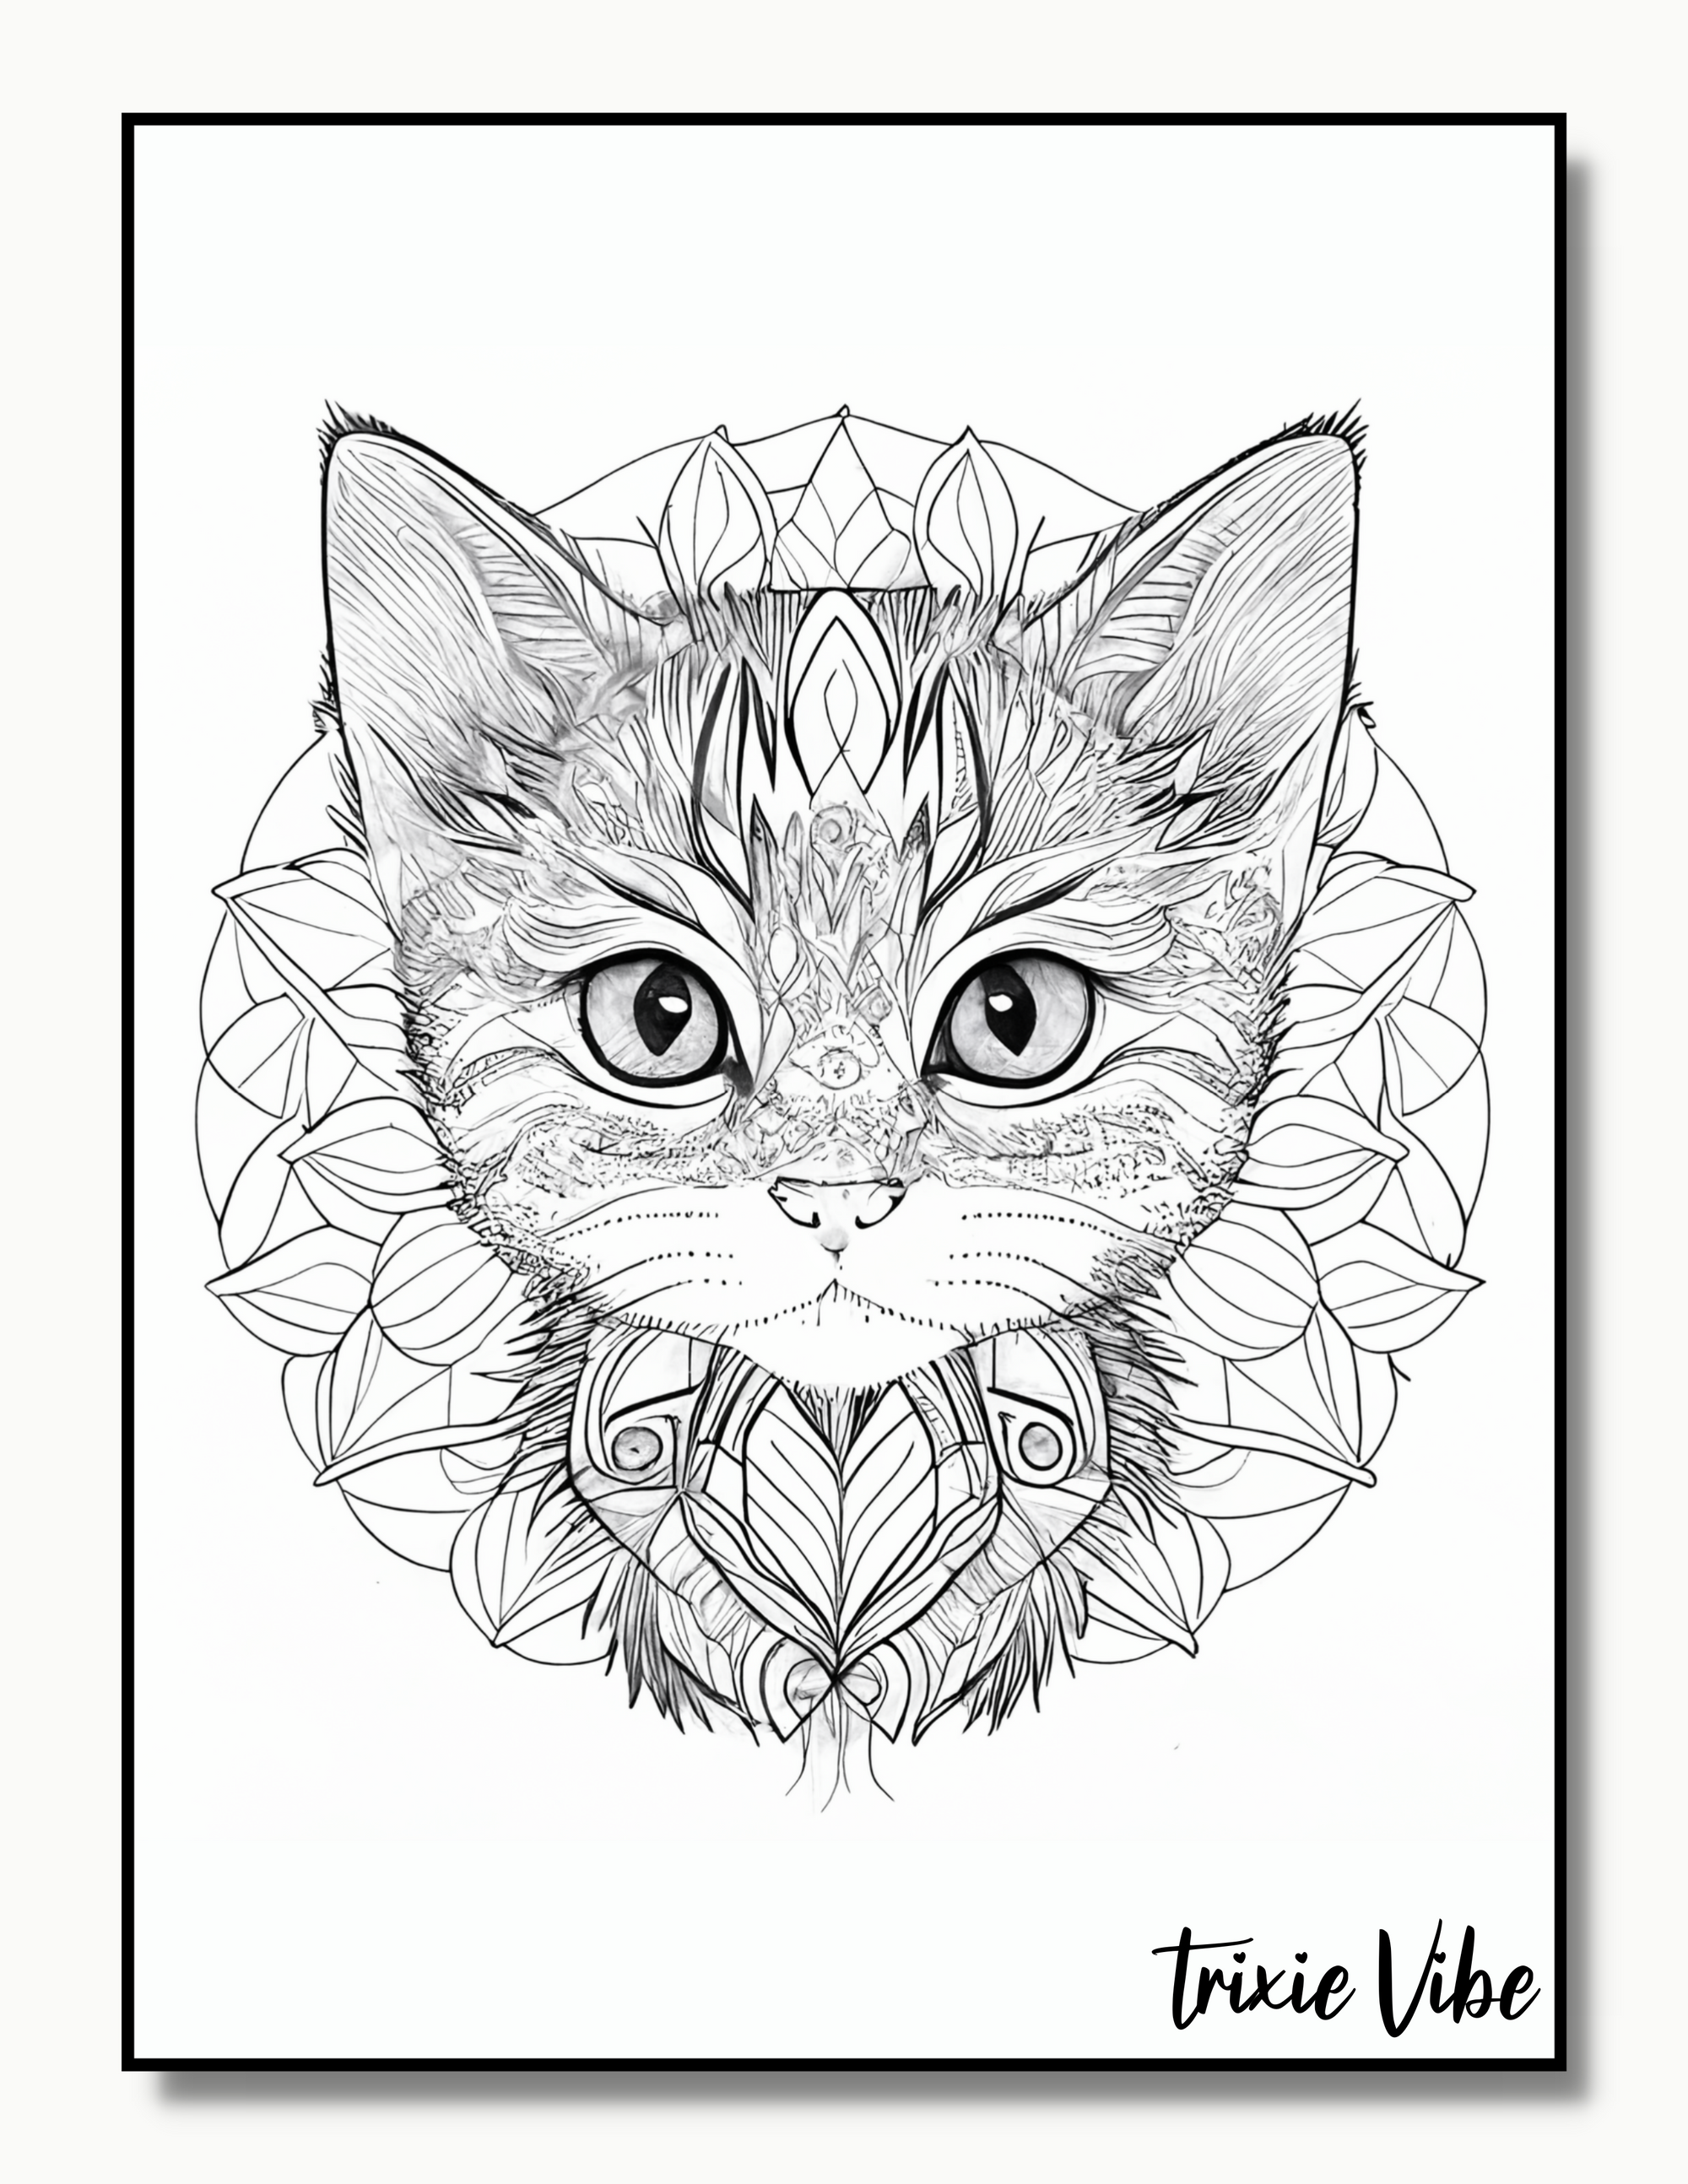 Cat Coloring Pages for Adults